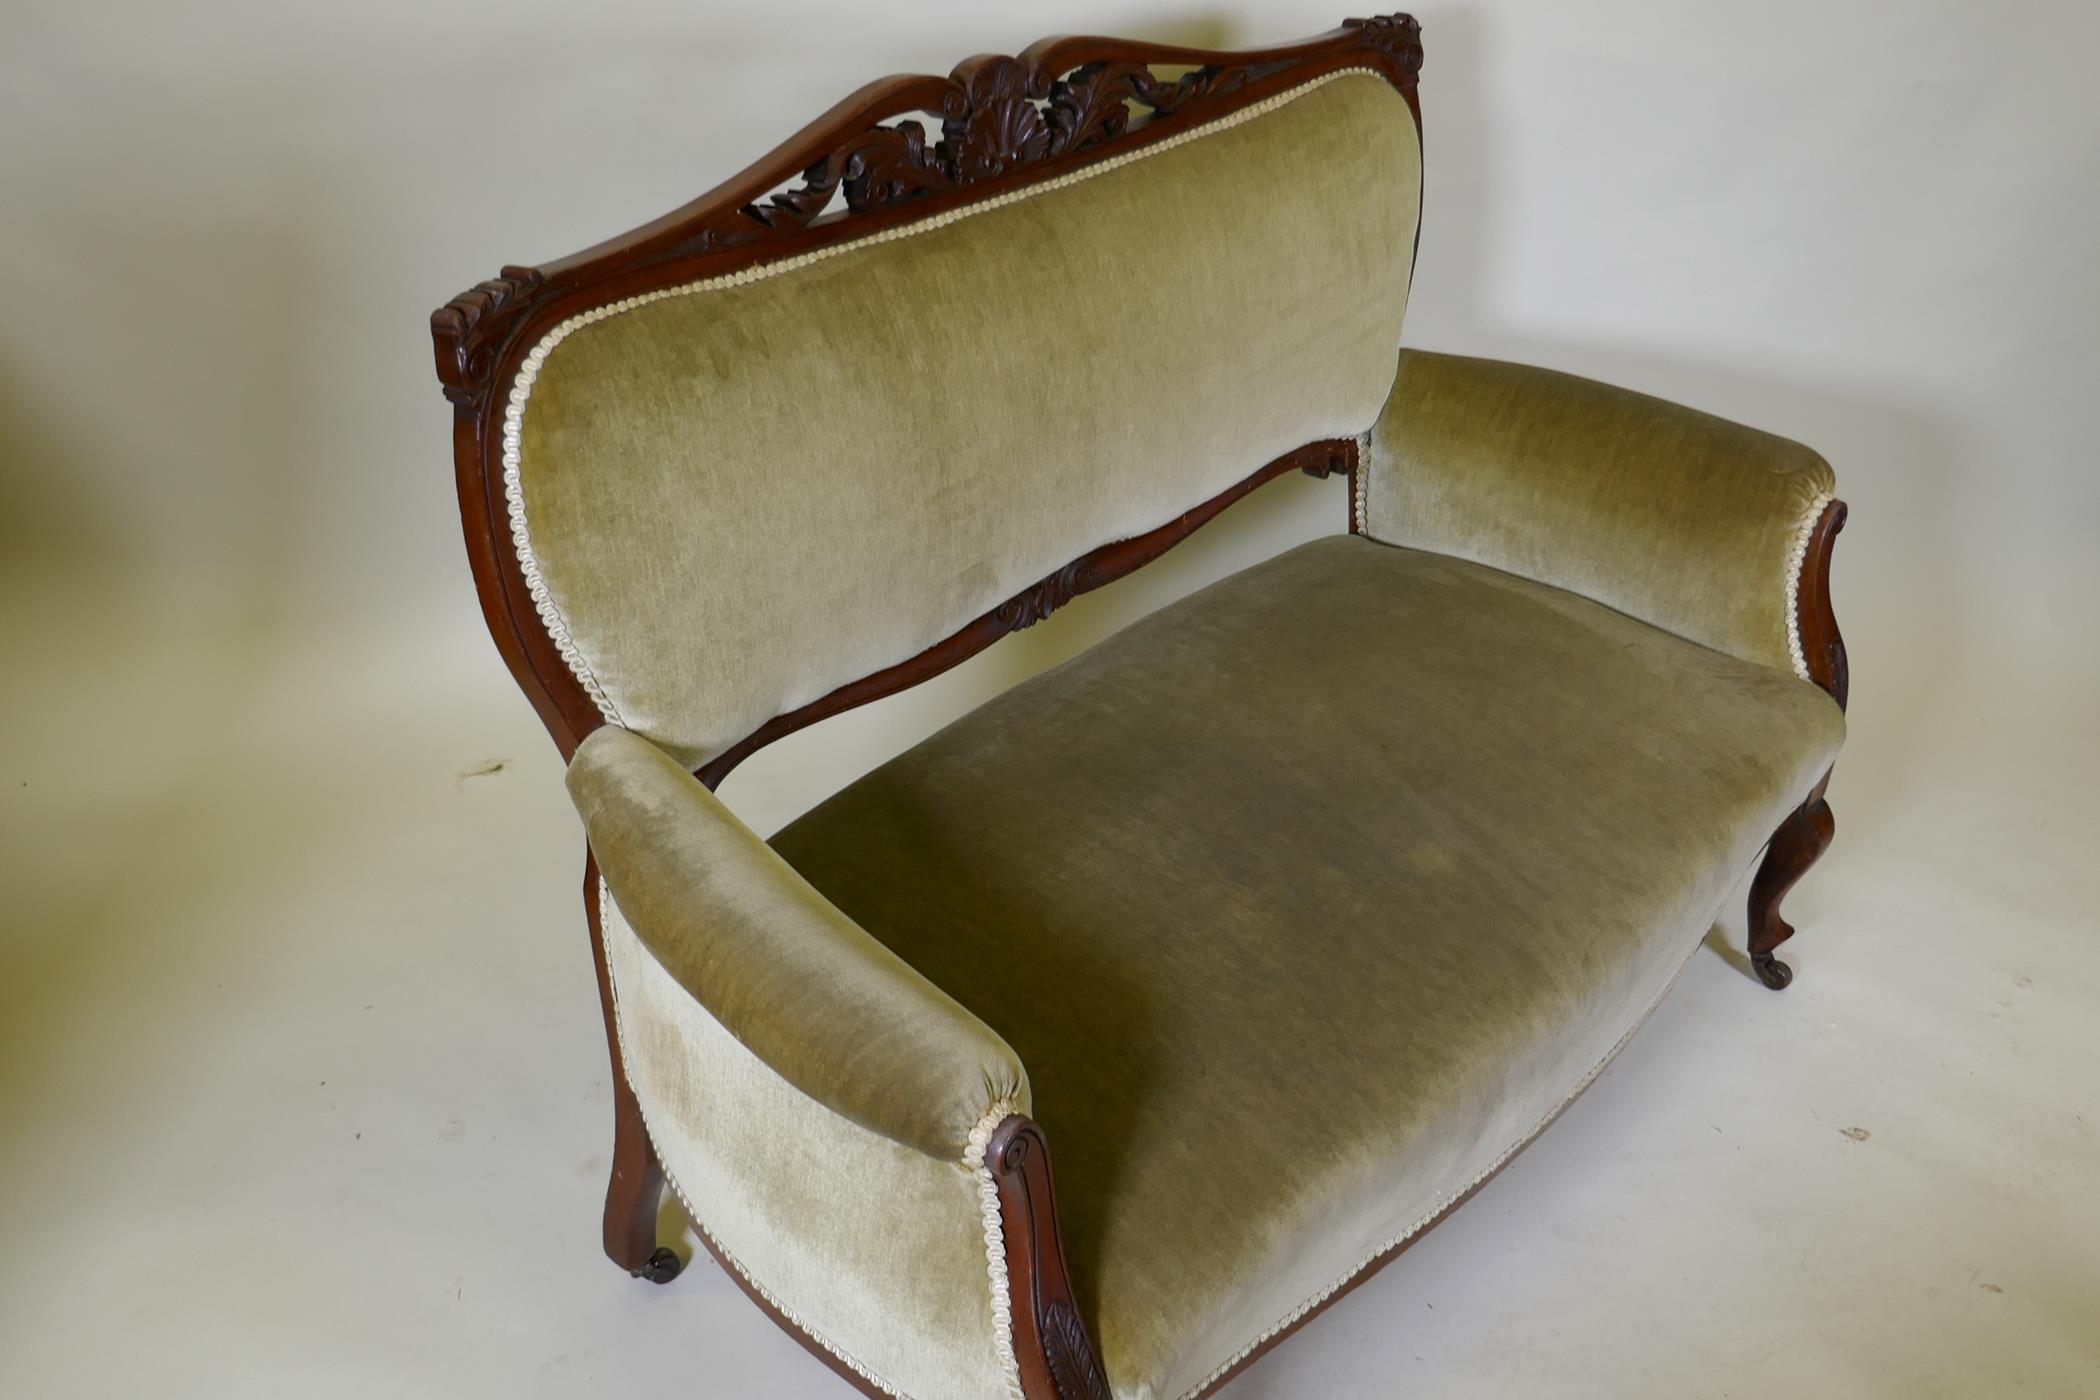 A C19th mahogany settee with carved and pierced detail and cabriole legs, possibly Berkey & Gay - Image 4 of 5